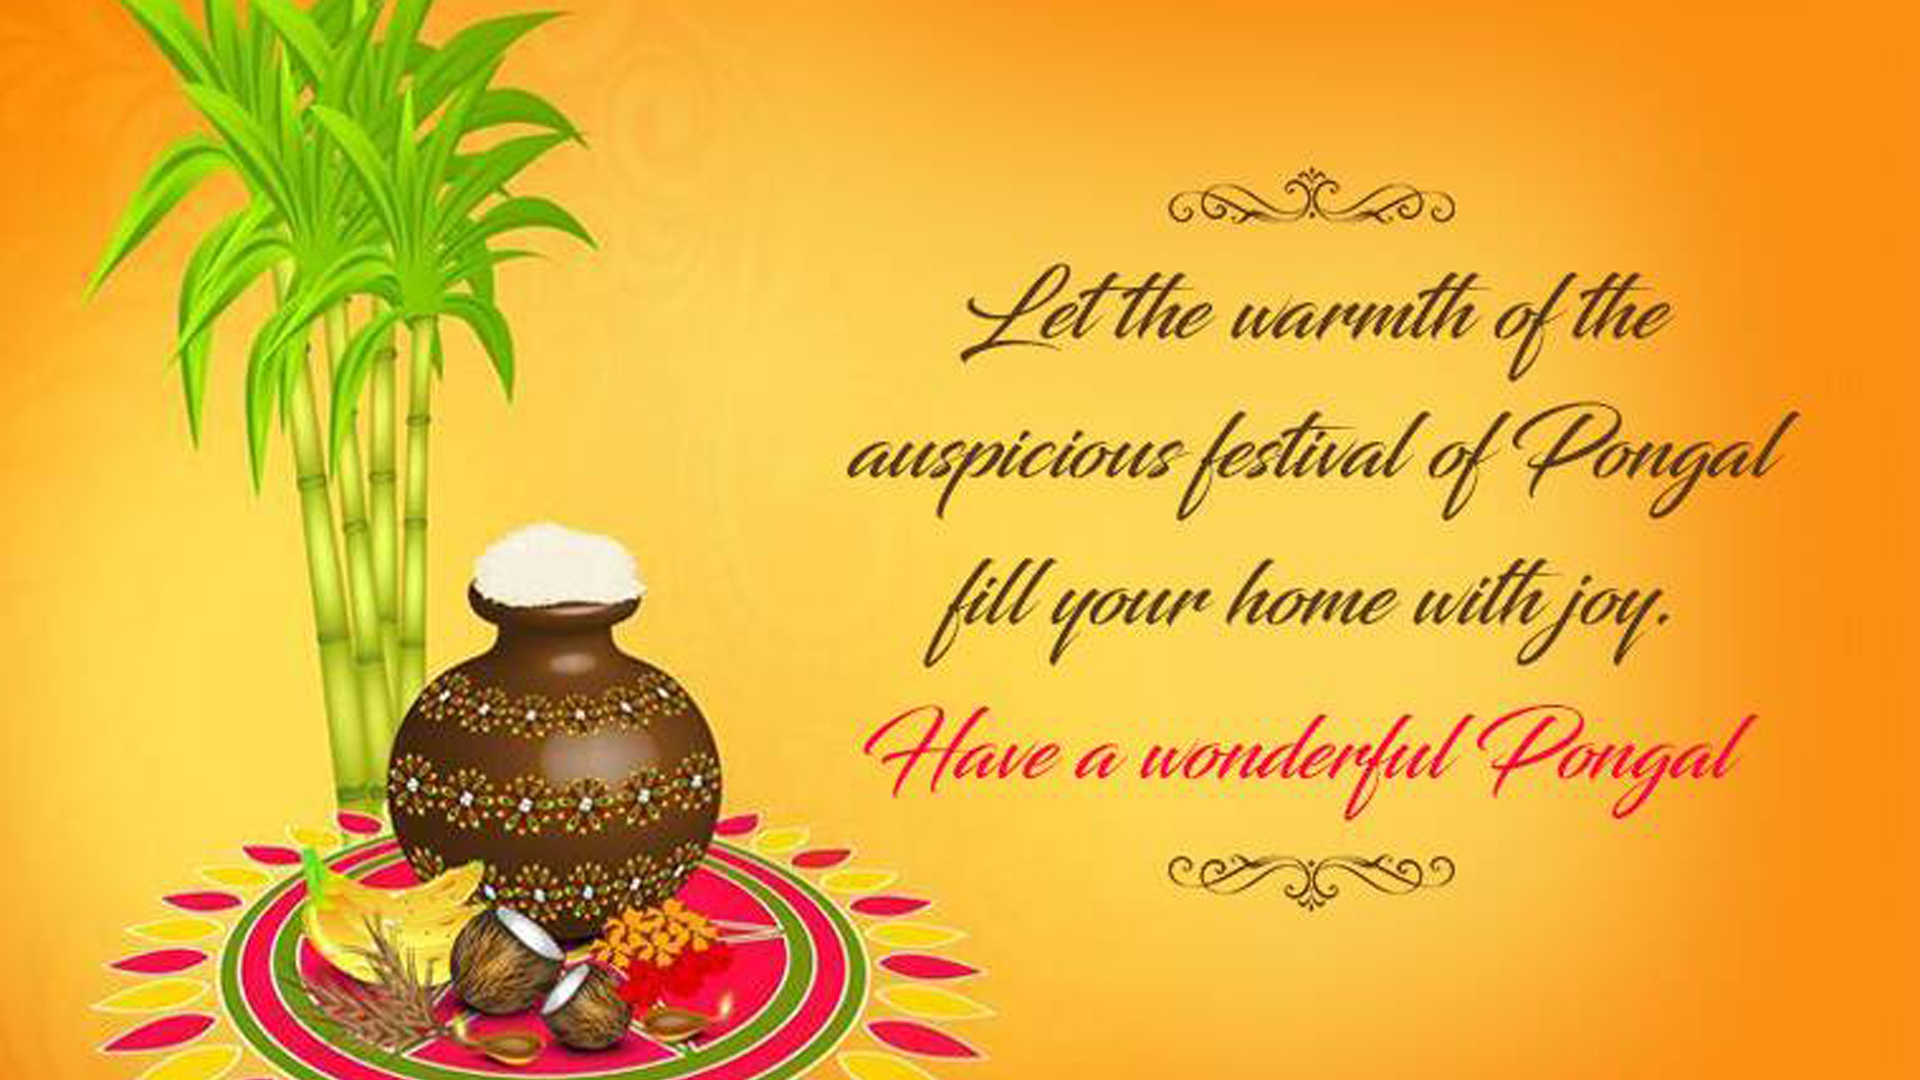 Let The Warmth Of The Auspicious Festival Of Pongal Fill Your Home With Joy Have A Wonderful Pongal 2K Pongal